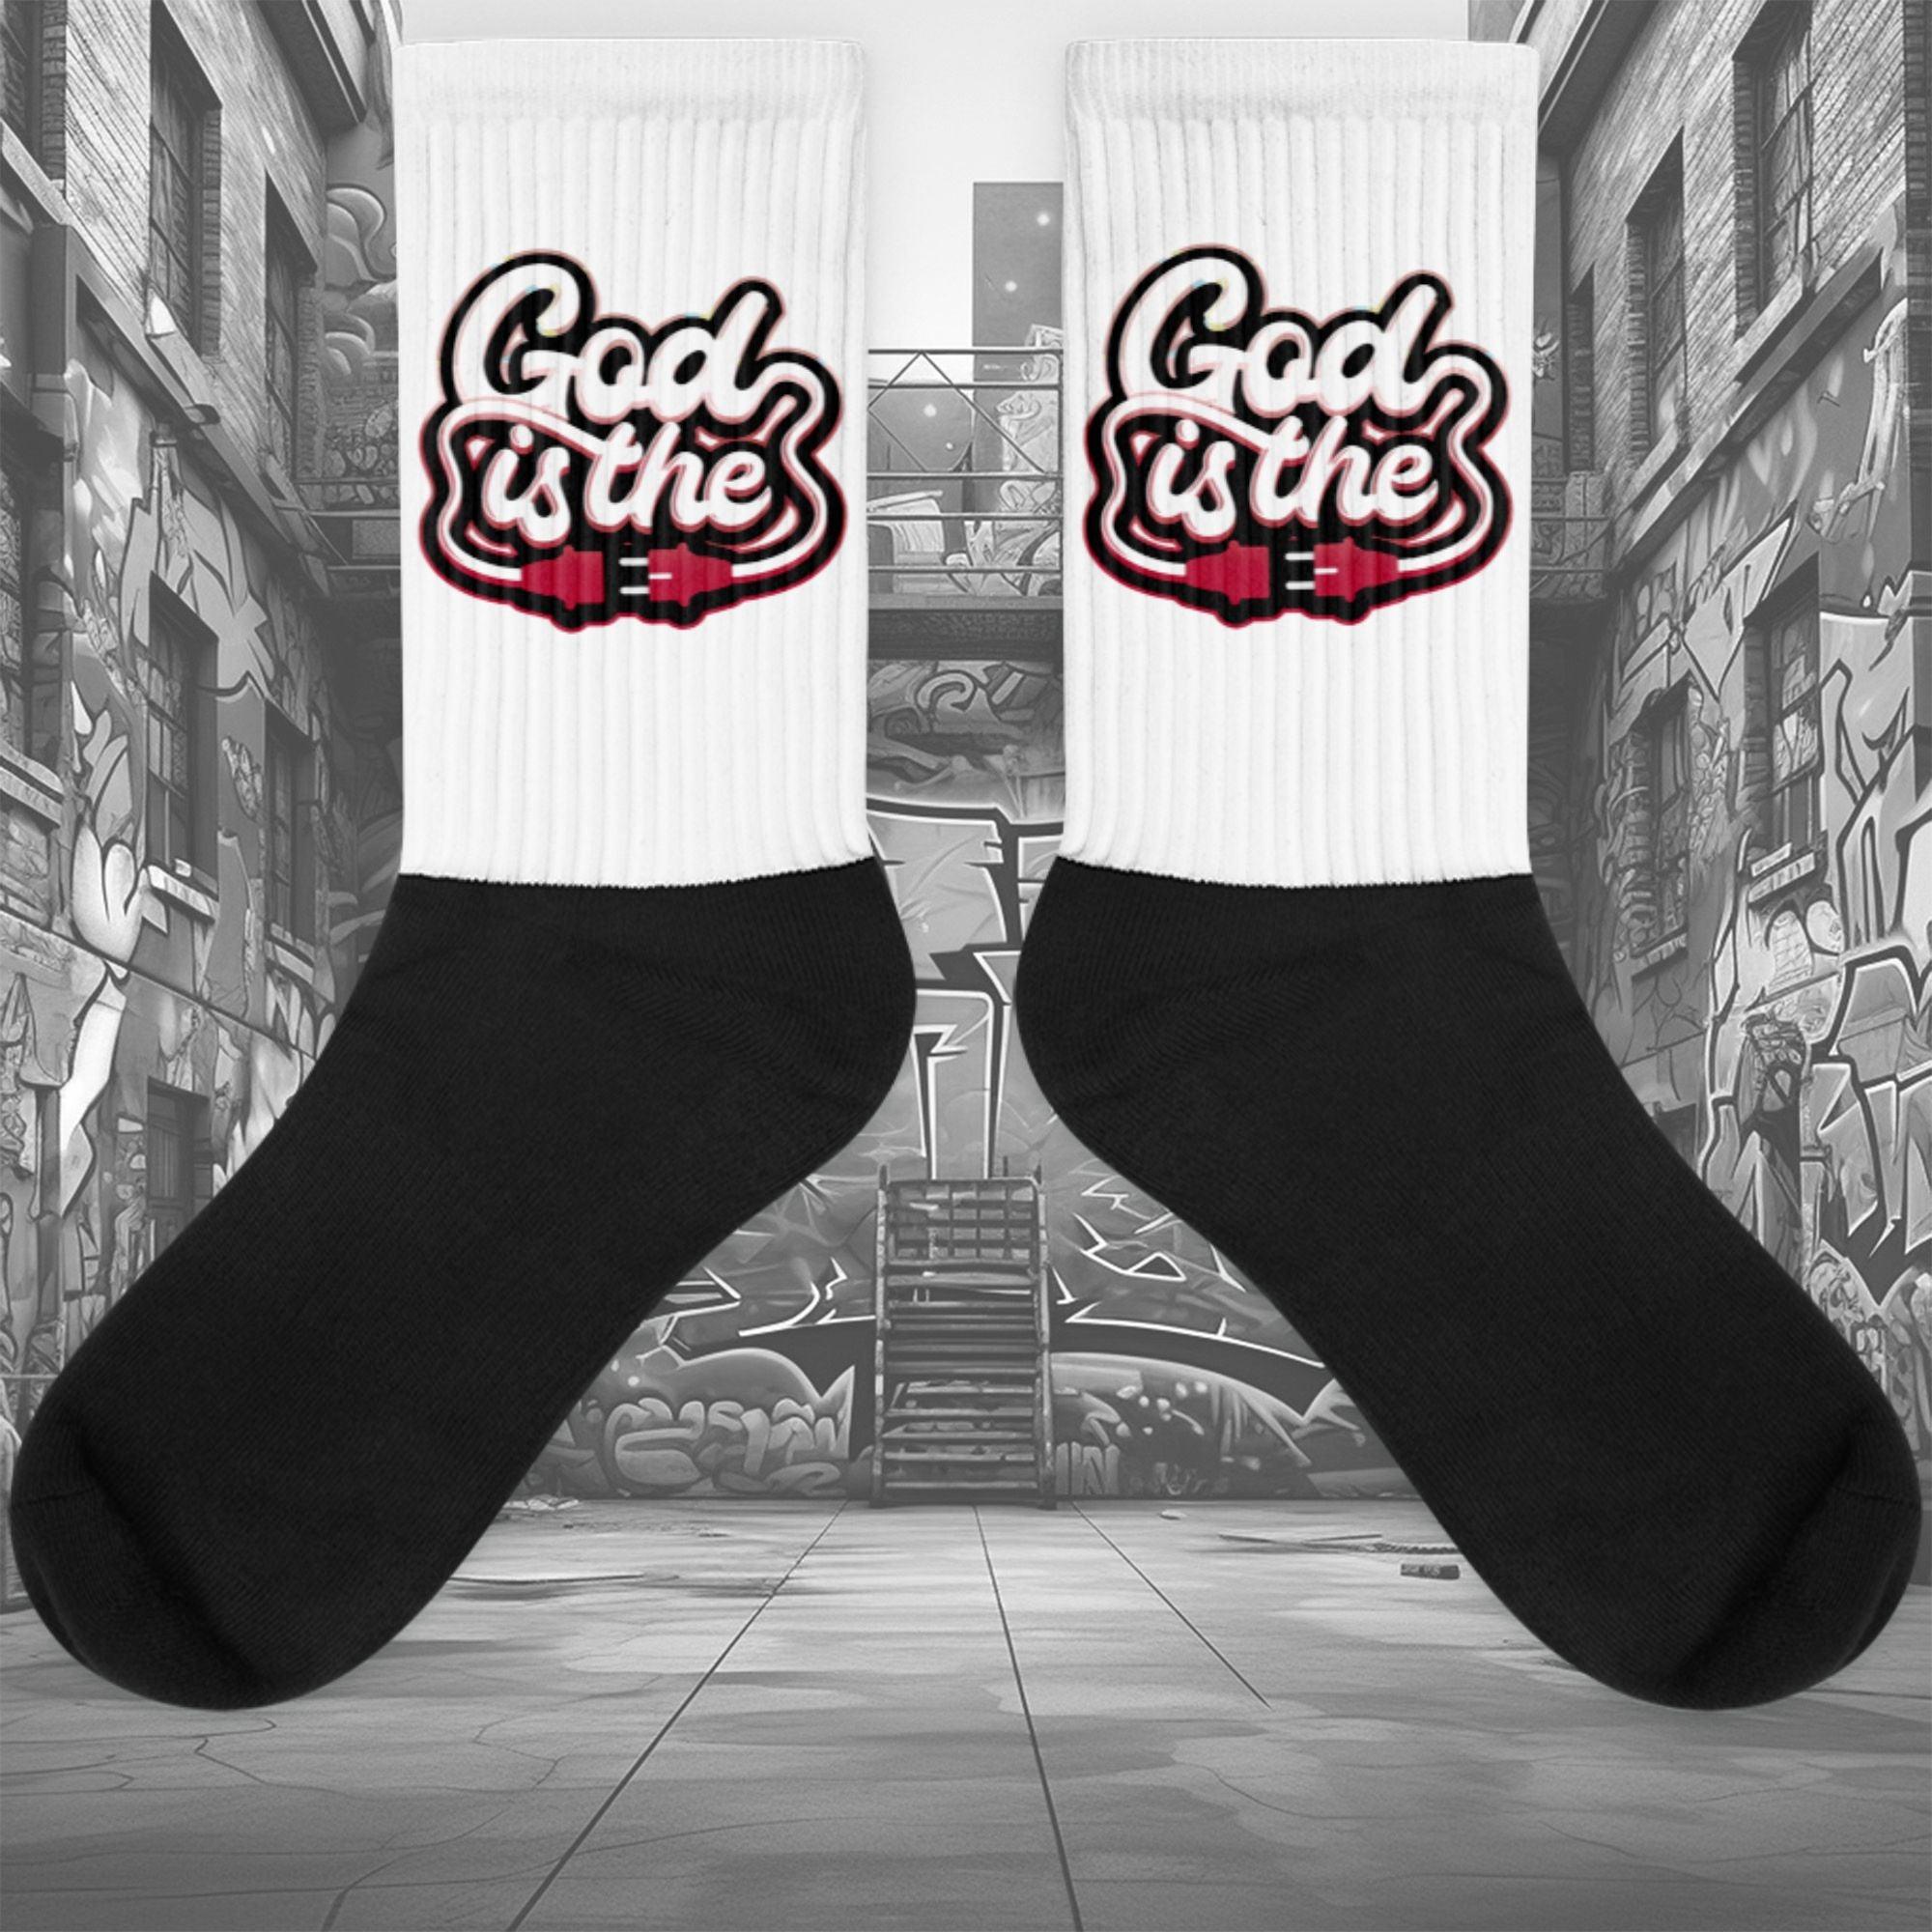  Showcases the view of the socks, highlighting the vibrant ‘ God Is The Plug ’ design, which perfectly complements the Air Jordan 1 Retro High OG Next Chapter Spider-Verse sneakers. The intricate pattern and color scheme inspired by the Spider-Verse theme are prominently displayed.  Focusing on the ribbed leg , cusioned bottoms and the snug fit of the socks. This angle provides a clear view of the texture and quality of the material blend